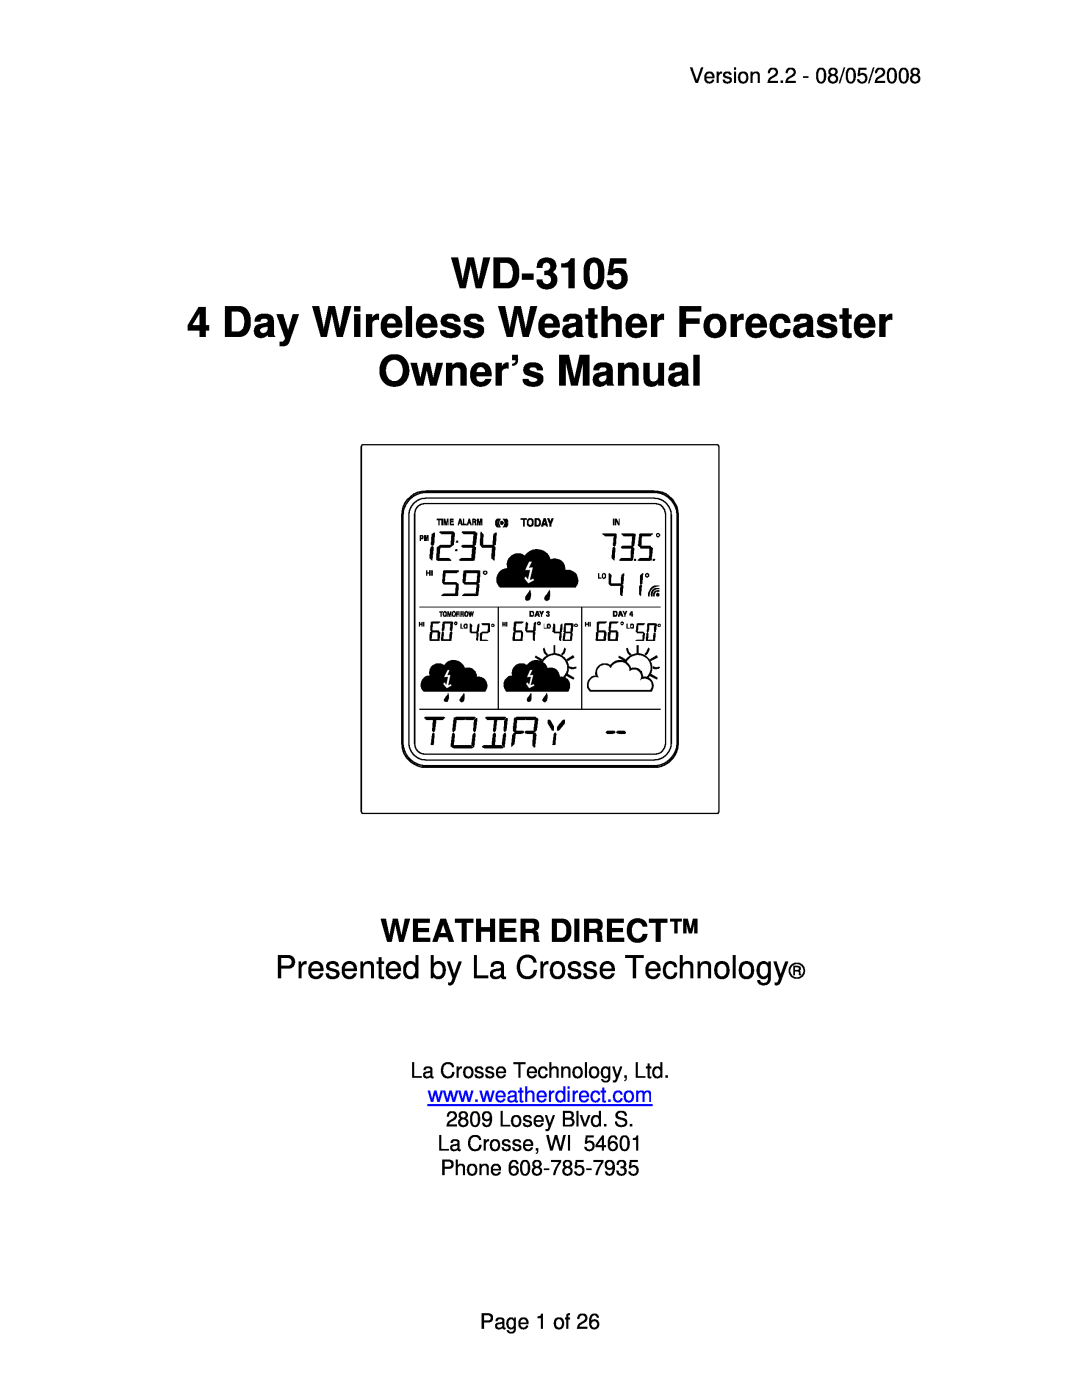 La Crosse Technology owner manual WD-3105 4 Day Wireless Weather Forecaster, Weather Direct 